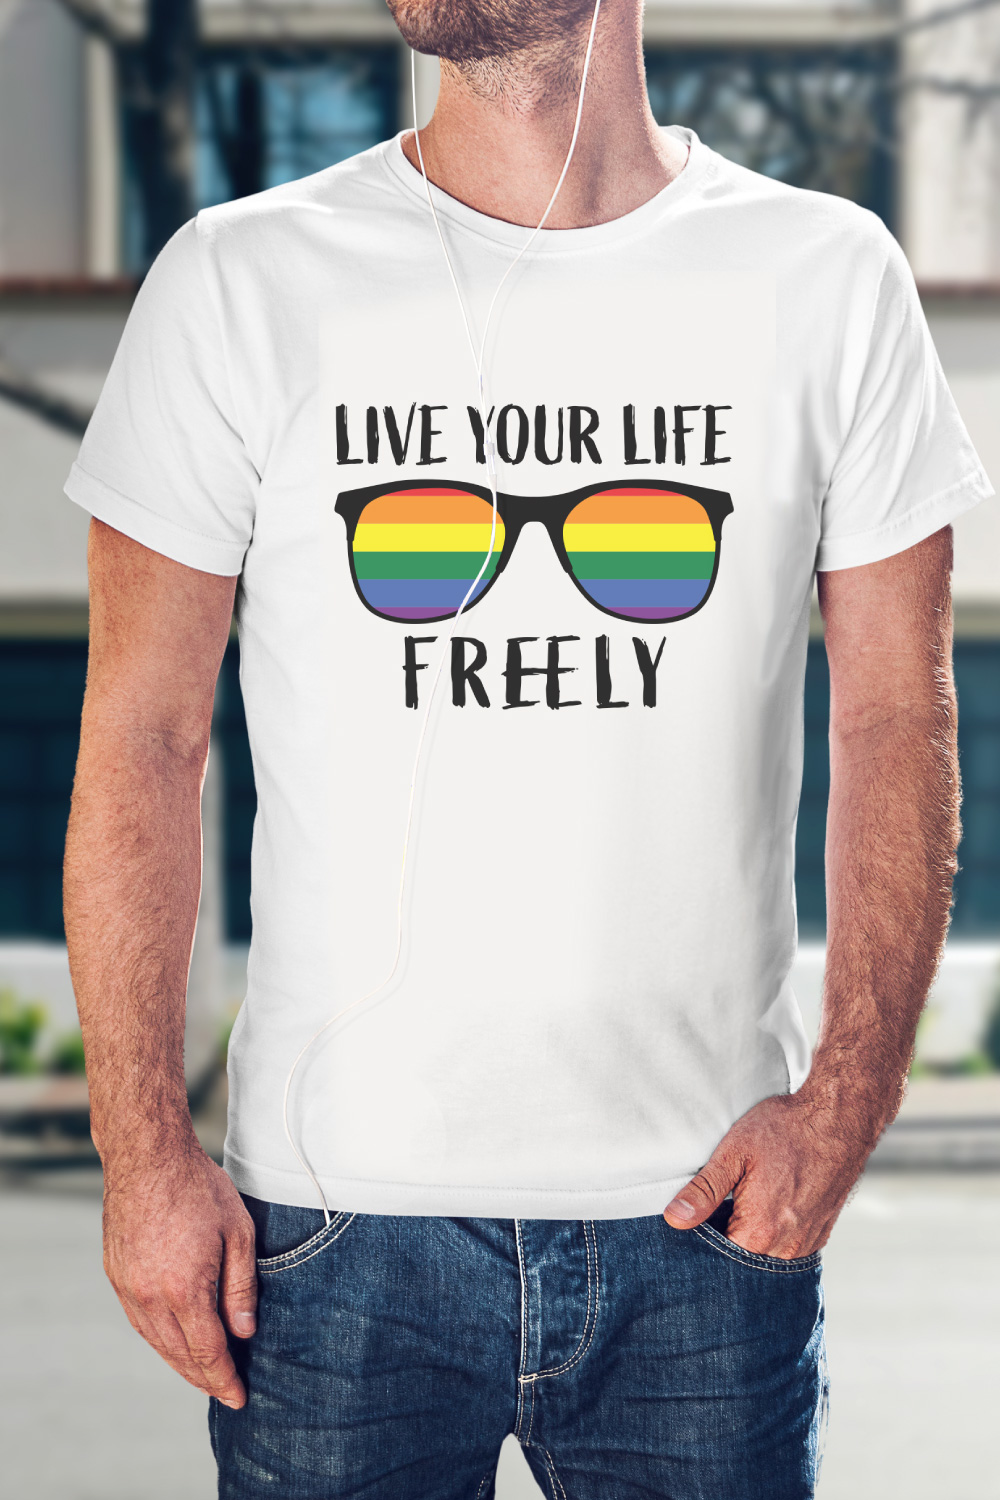 Live your life freely tshirt design pinterest preview image.